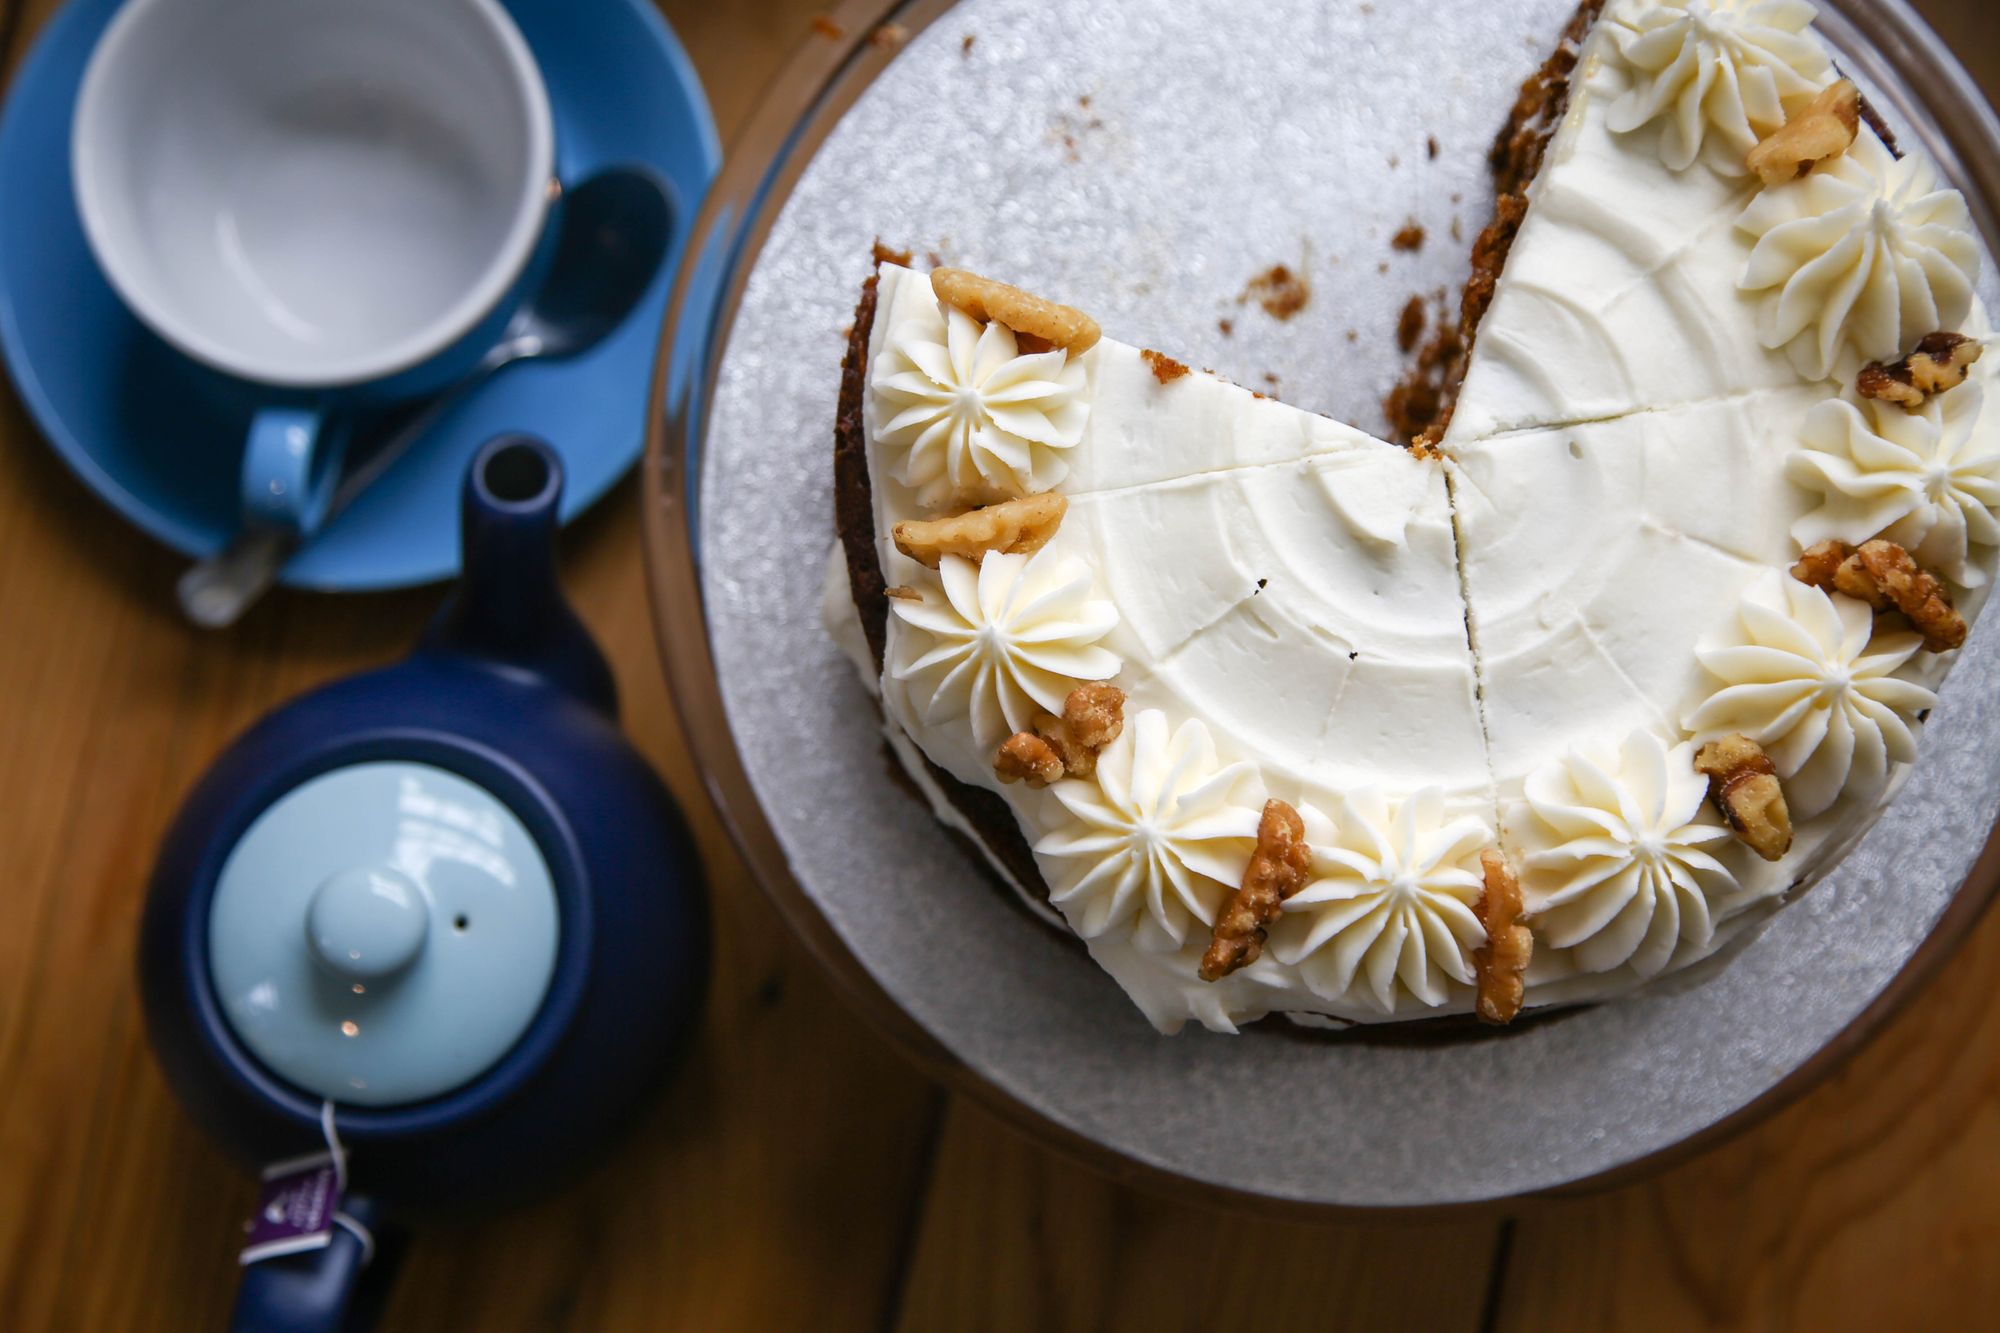 Carrot cake and tea stock product photo for Aston Clinton coffee shop by Tanya Aldcroft Photography